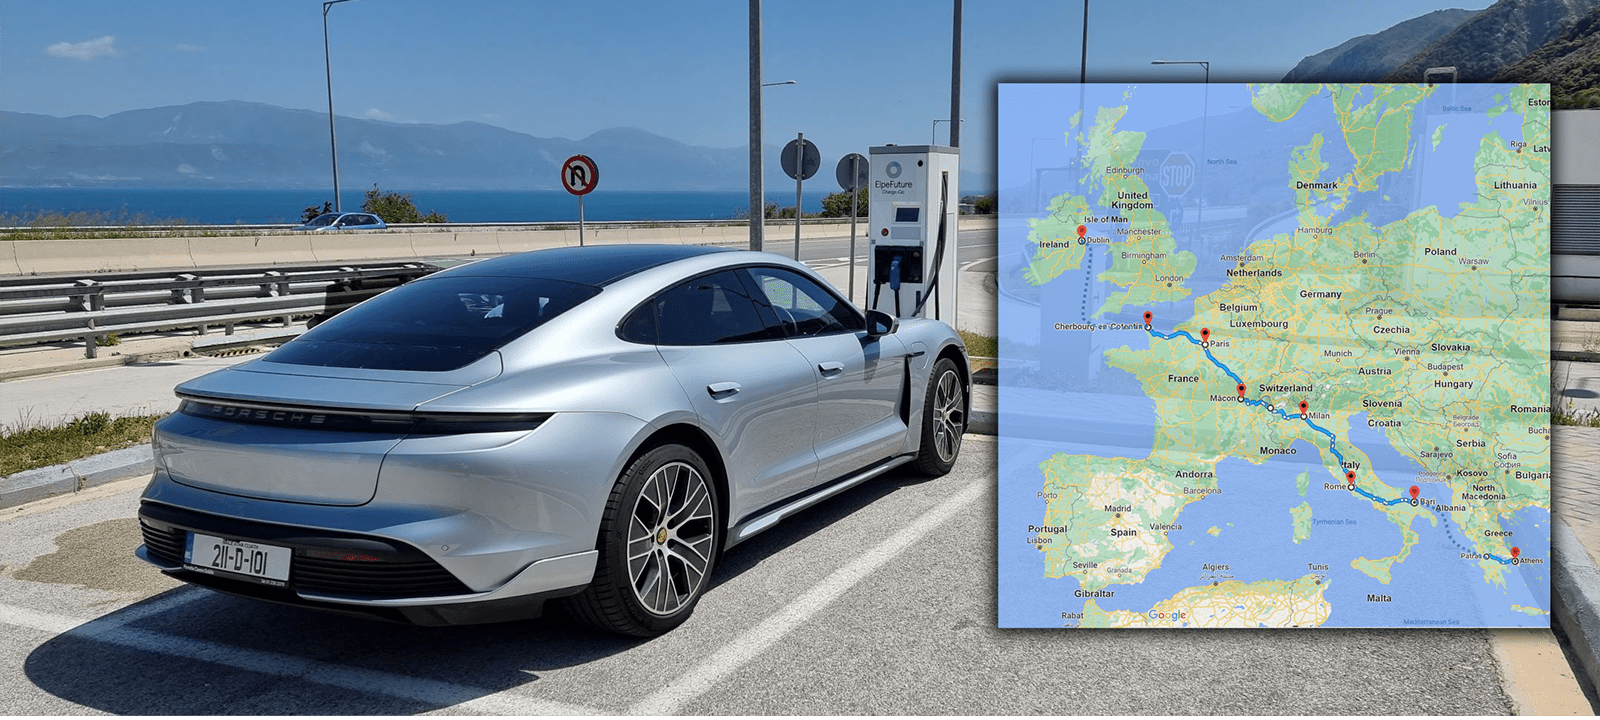 Planning a Road Trip Across Europe in a Porsche Taycan 4S? Read This First!